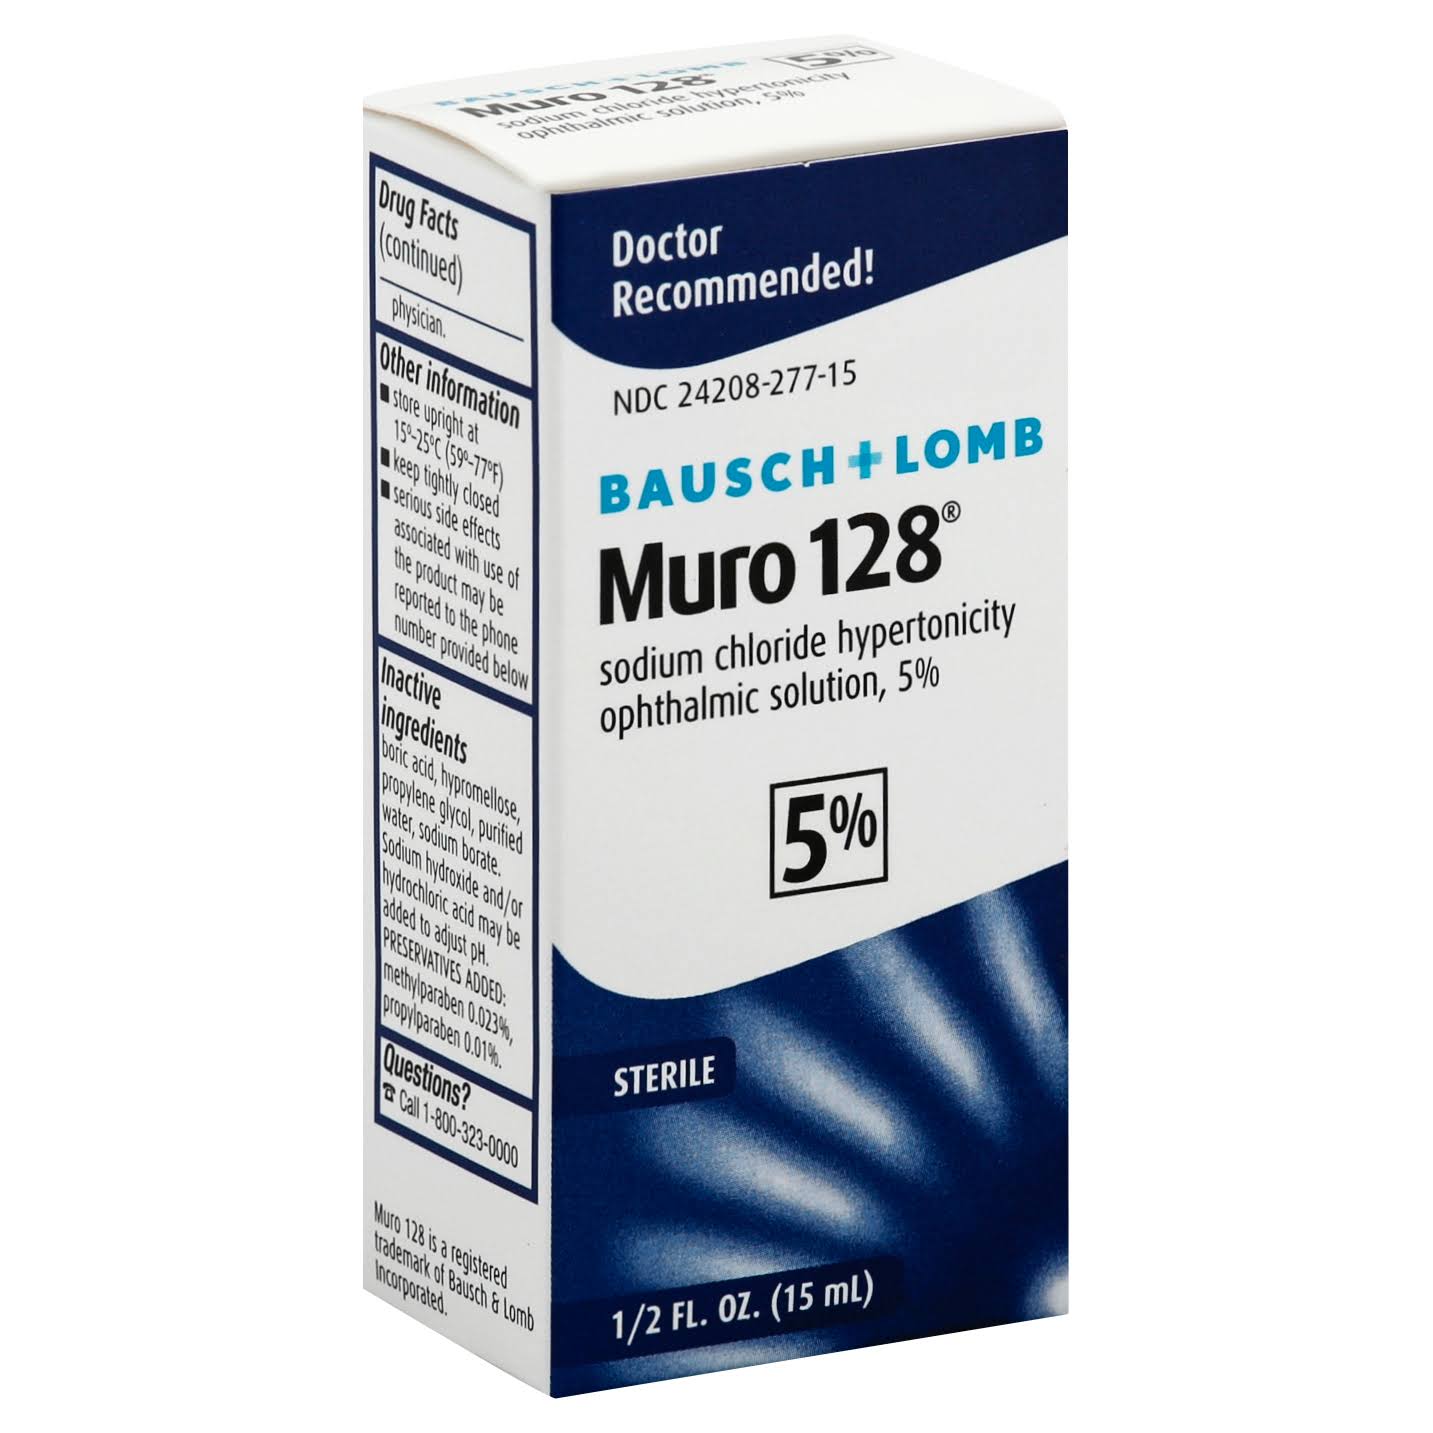 Bausch & Lomb Muro 128 Ophthalmic Solution - 0.5 oz